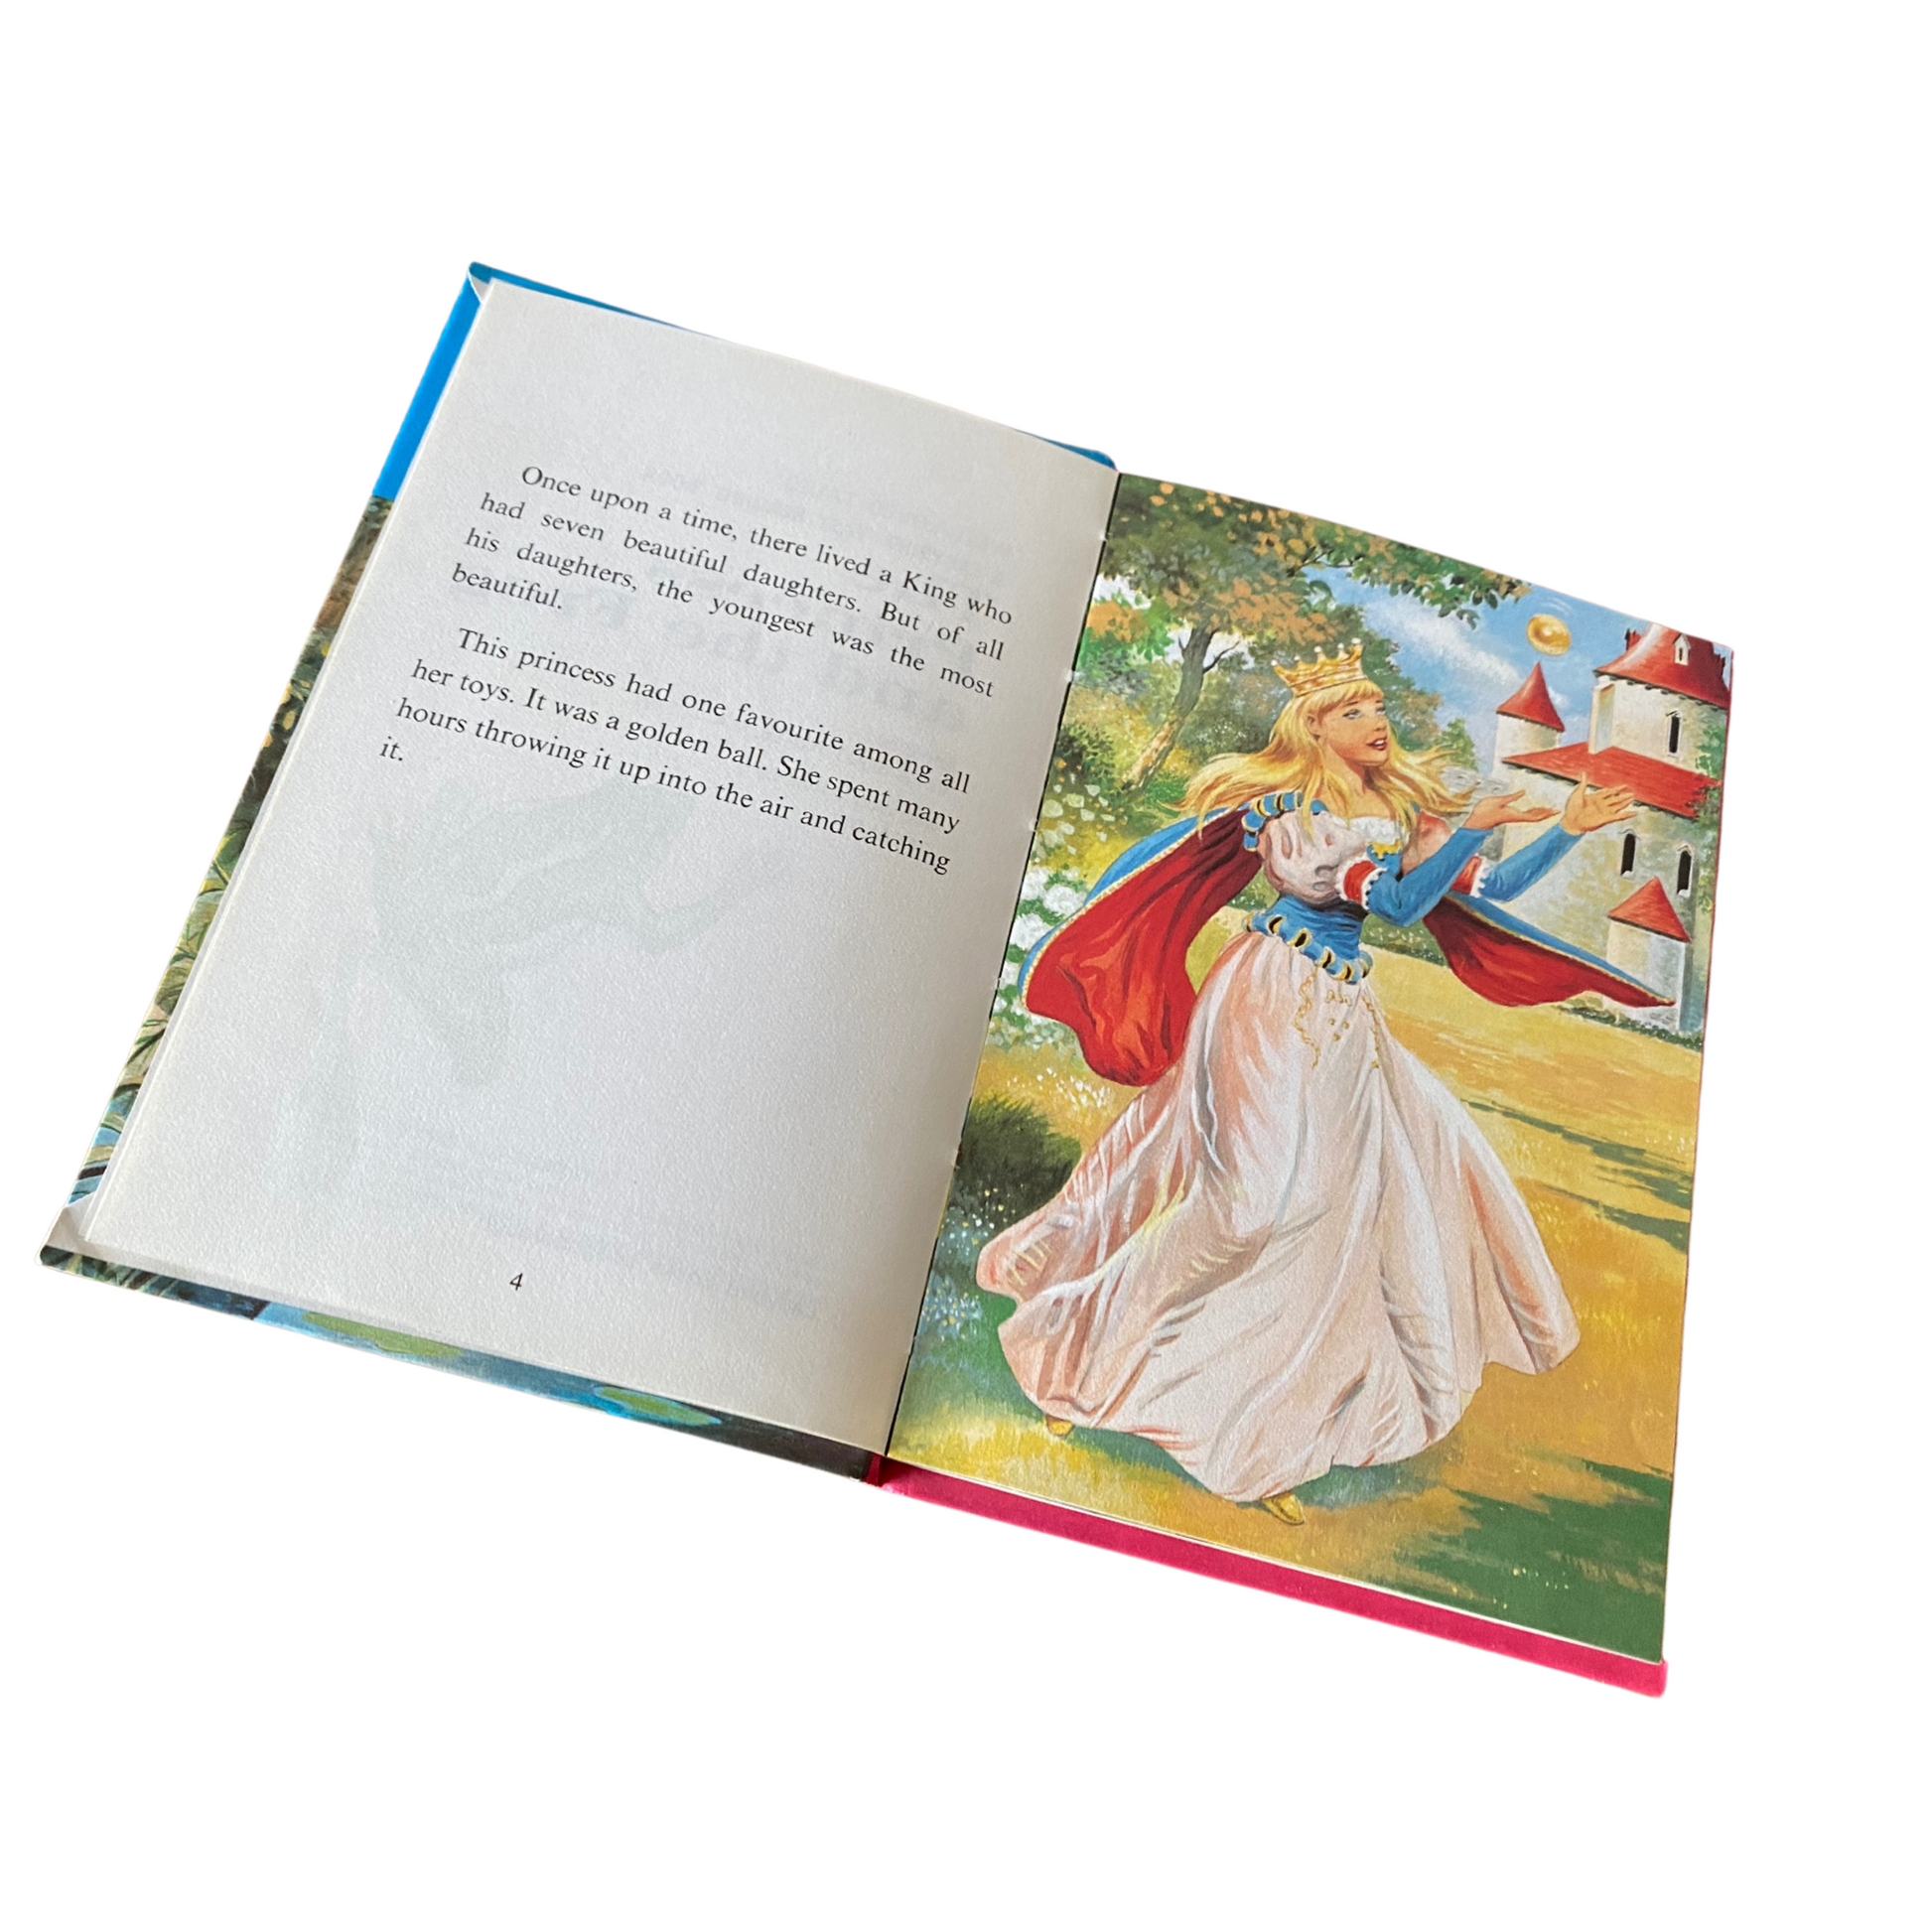 Easy reading edition -  The Princess and the Frog  retold by Vera Southgate , illustrated by Calpaldi